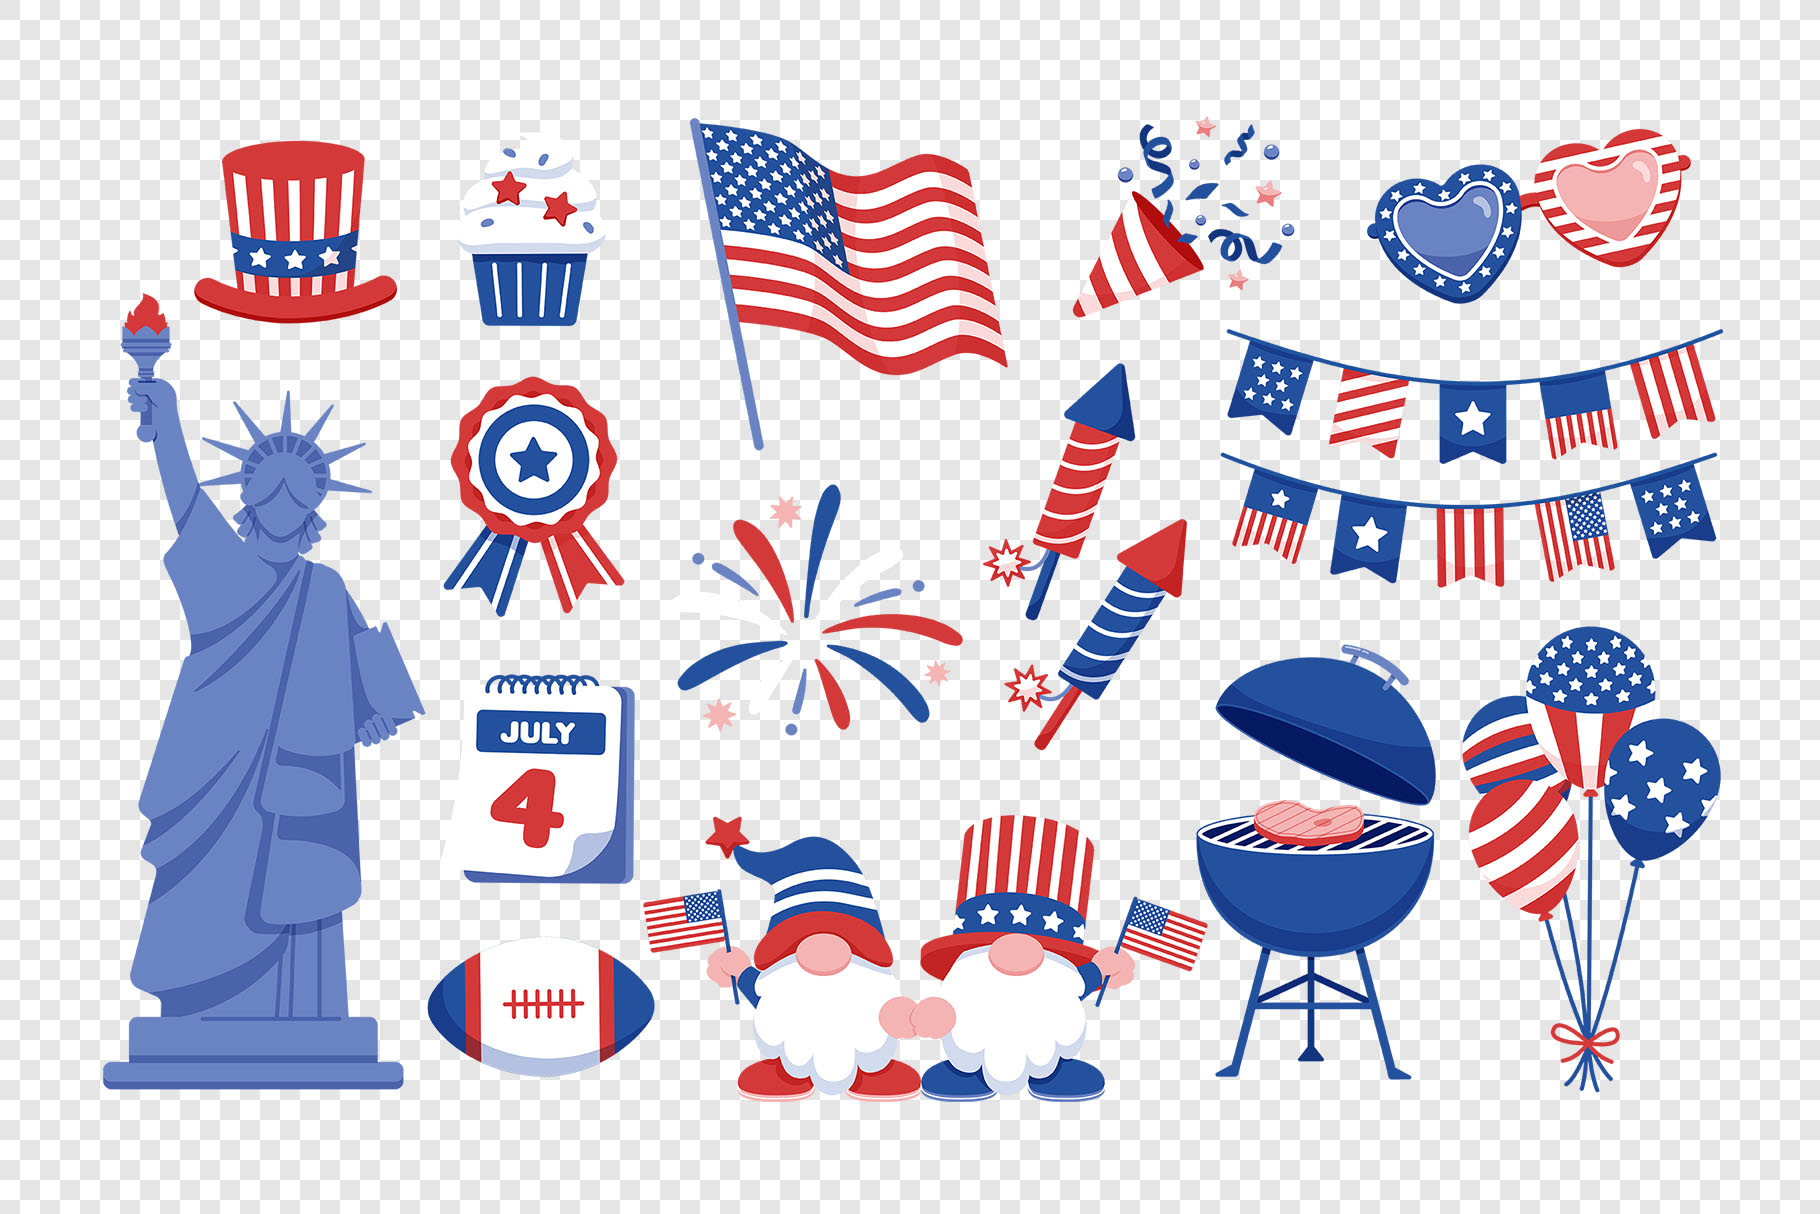 4th July Vector Illustrations Set (AI, EPS, PNG Format)